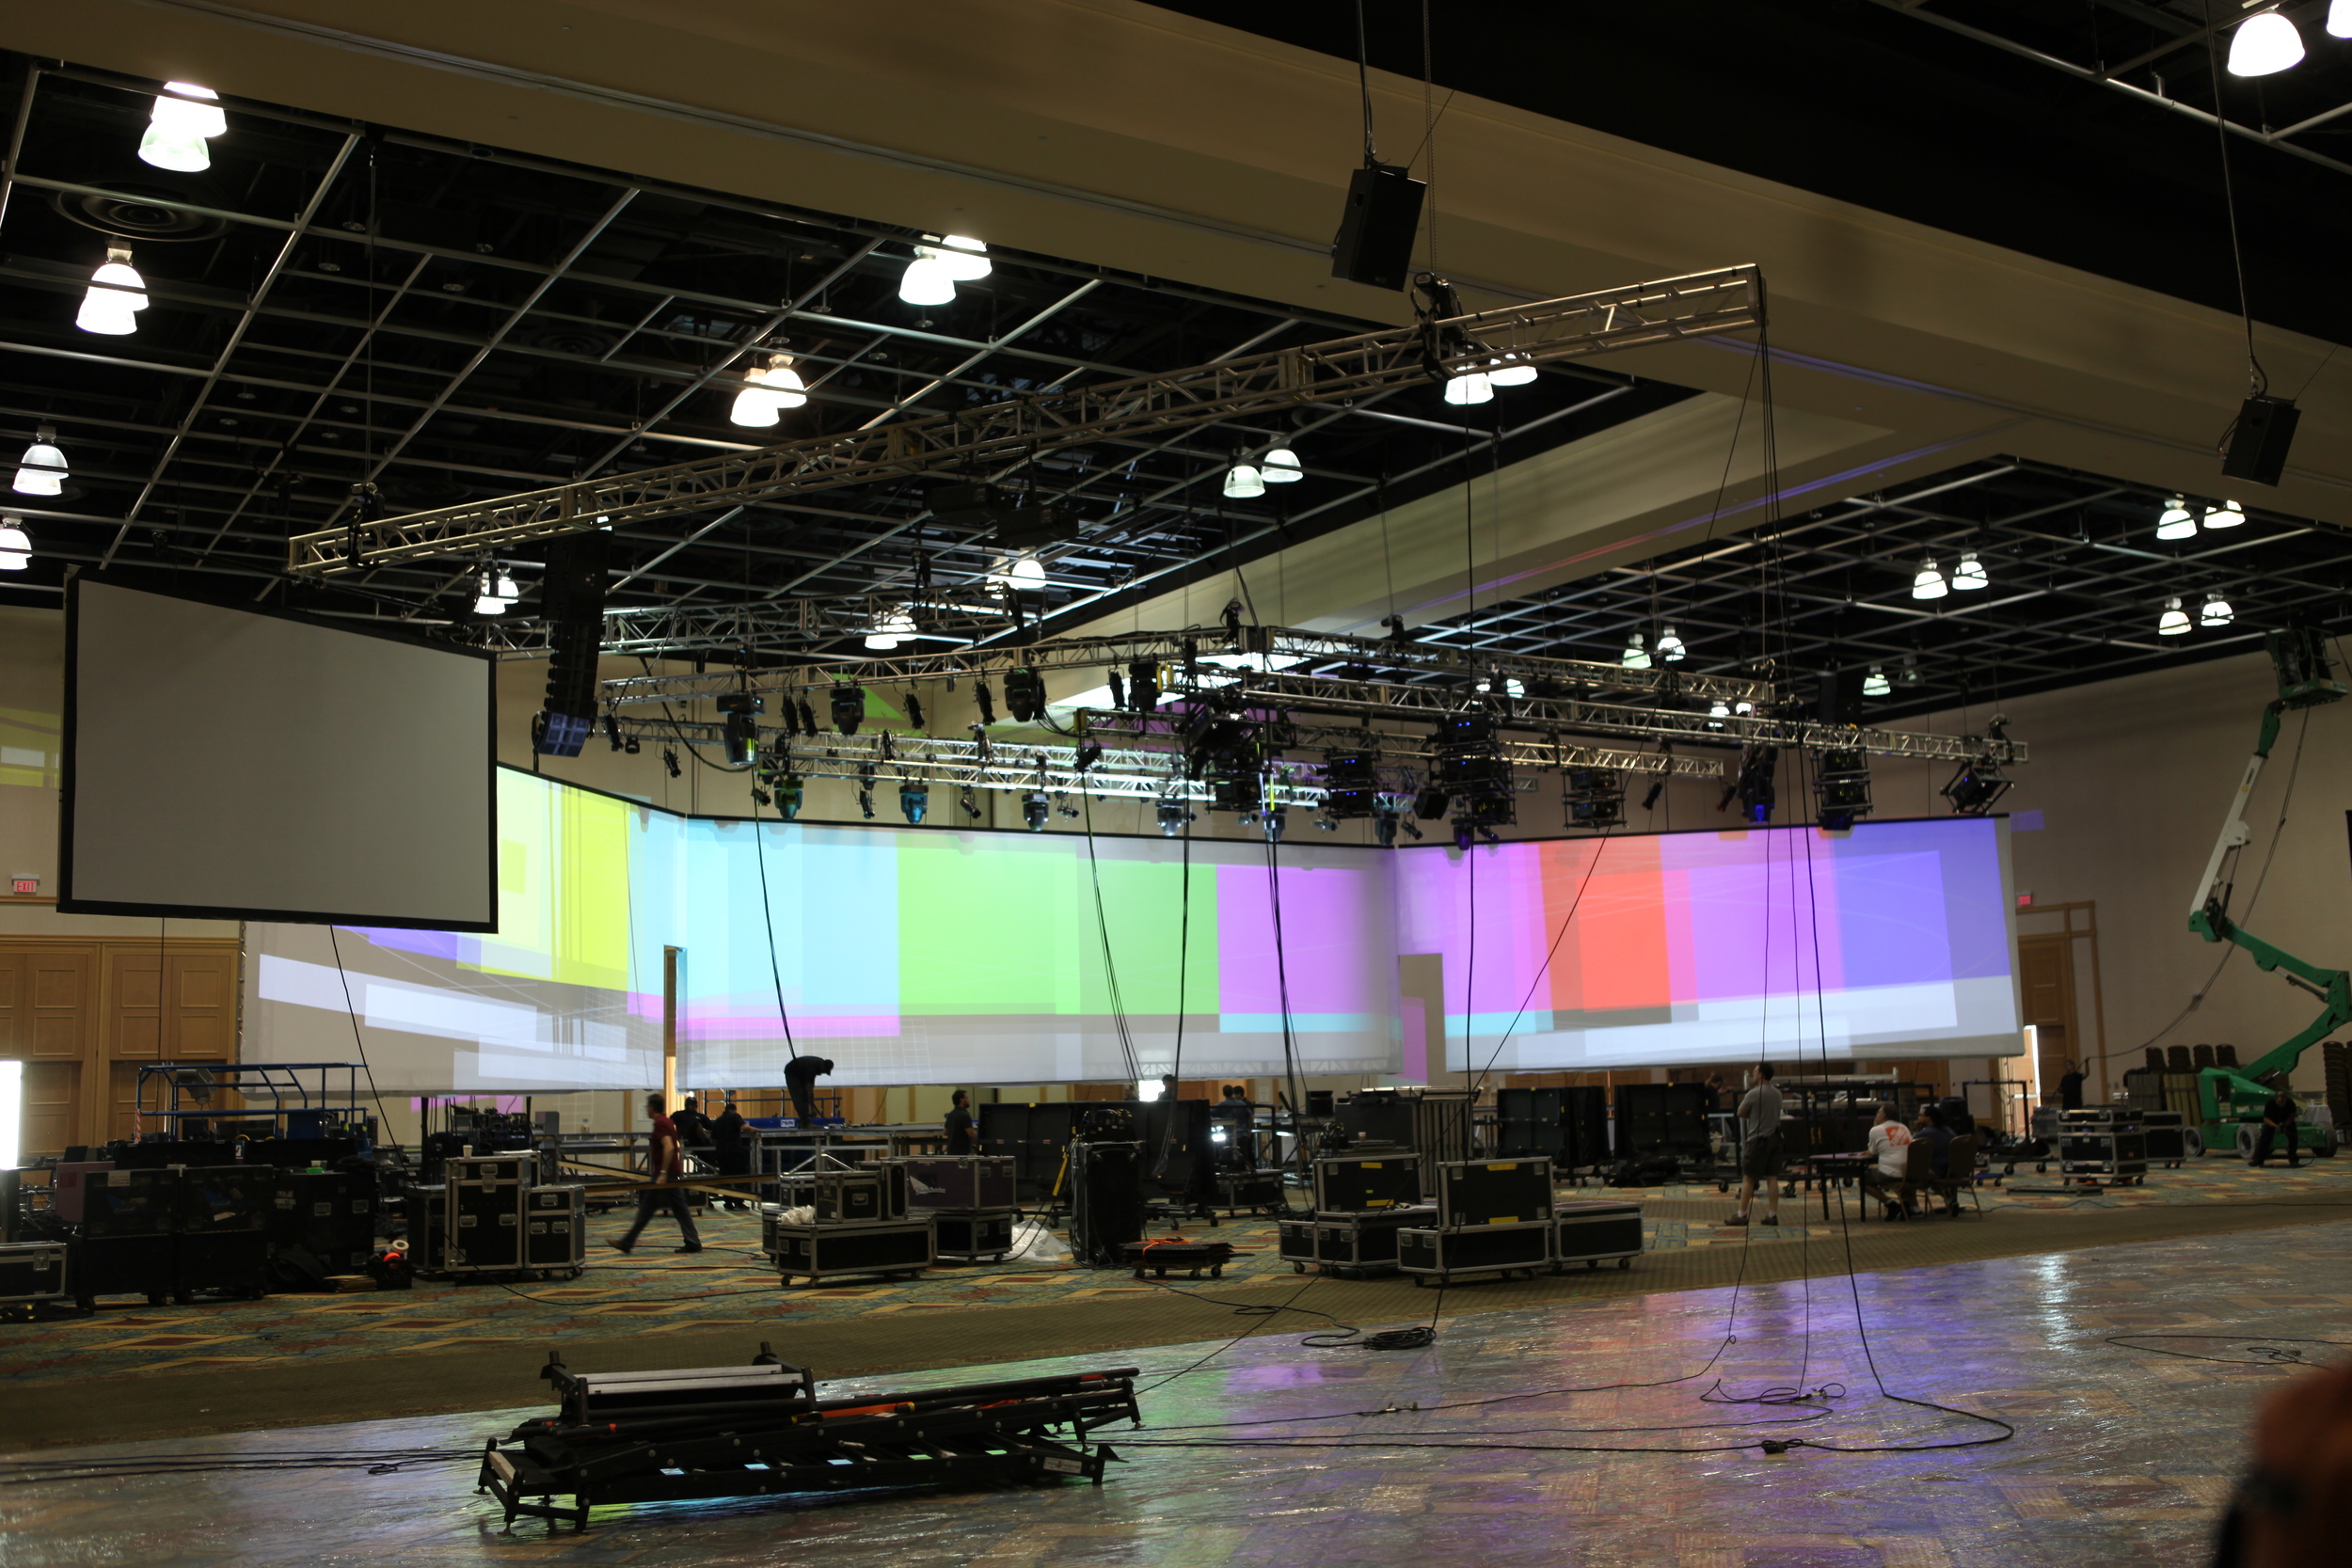 Photo of an ultrawide screen during AV setup at a recent Tri-Marq event.